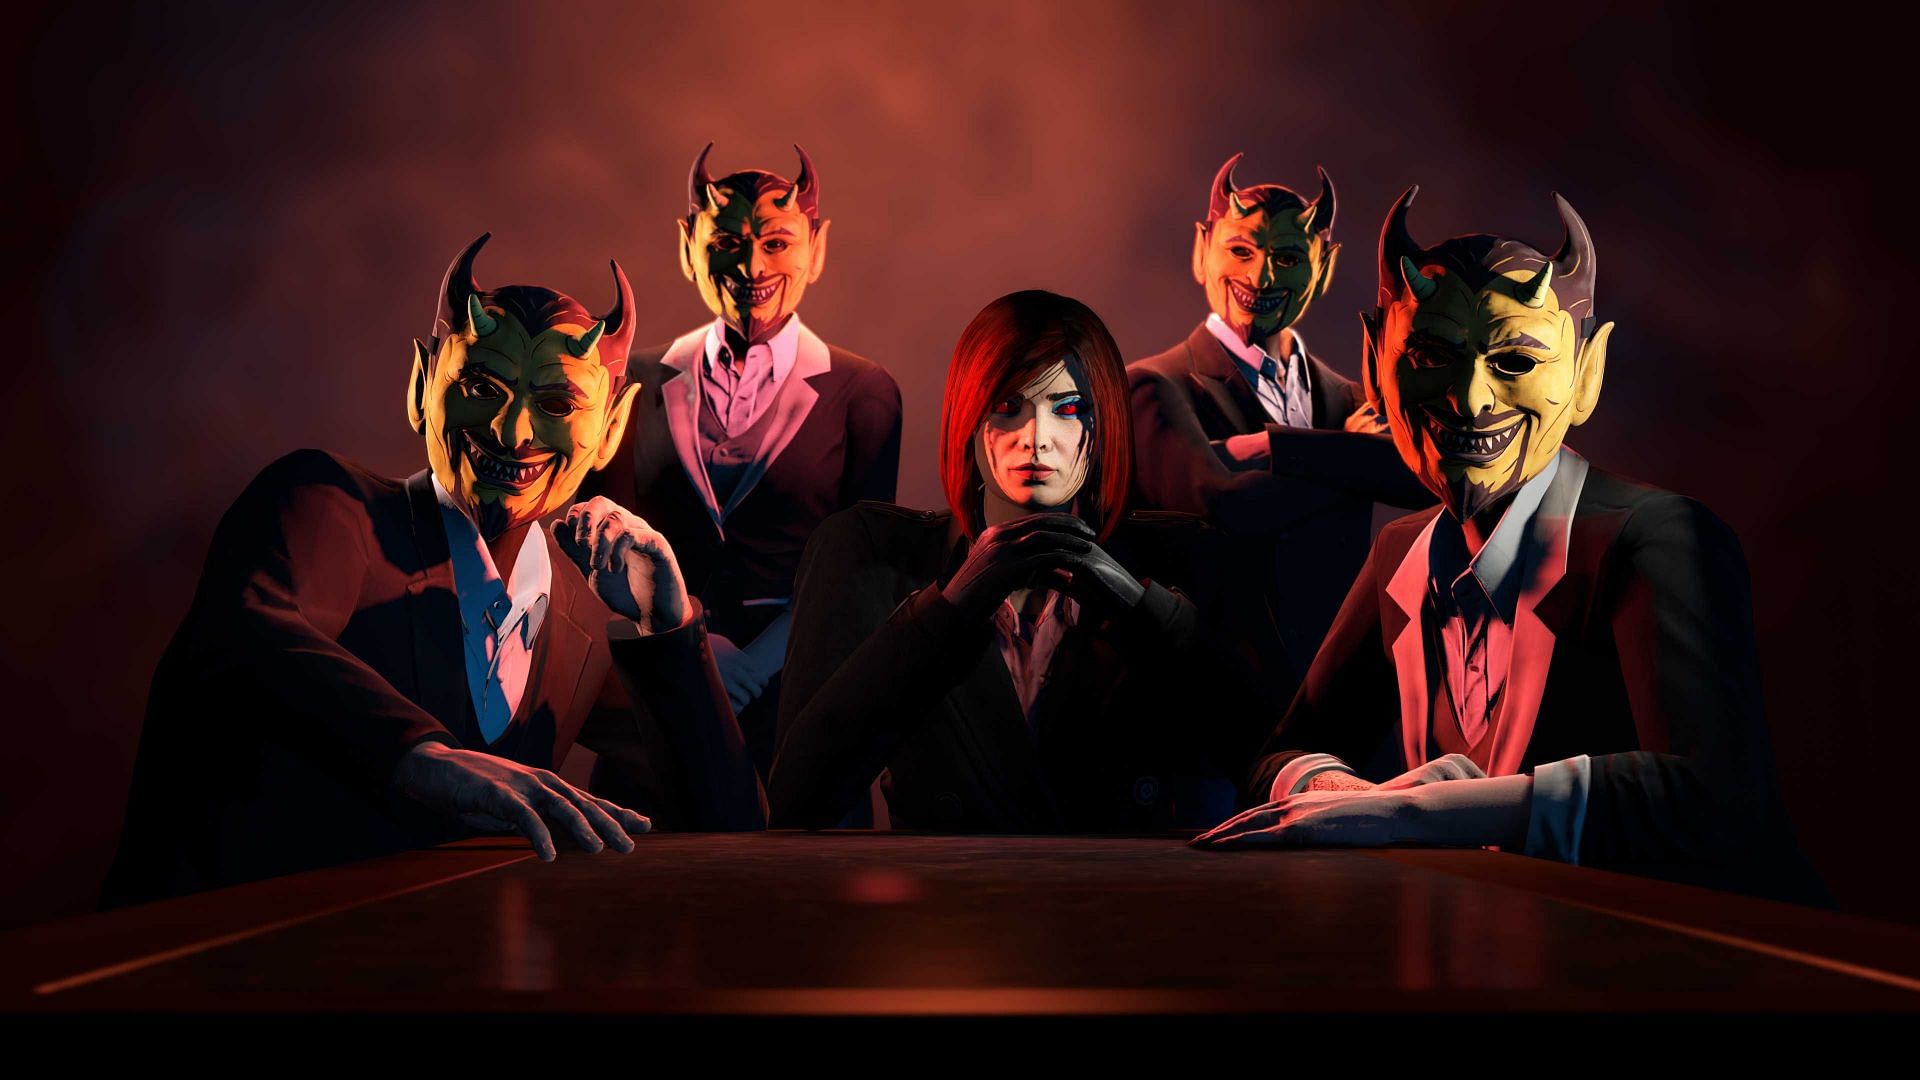 Four of the players here are wearing the Amber Vintage Devil Mask (Image via Rockstar Games)